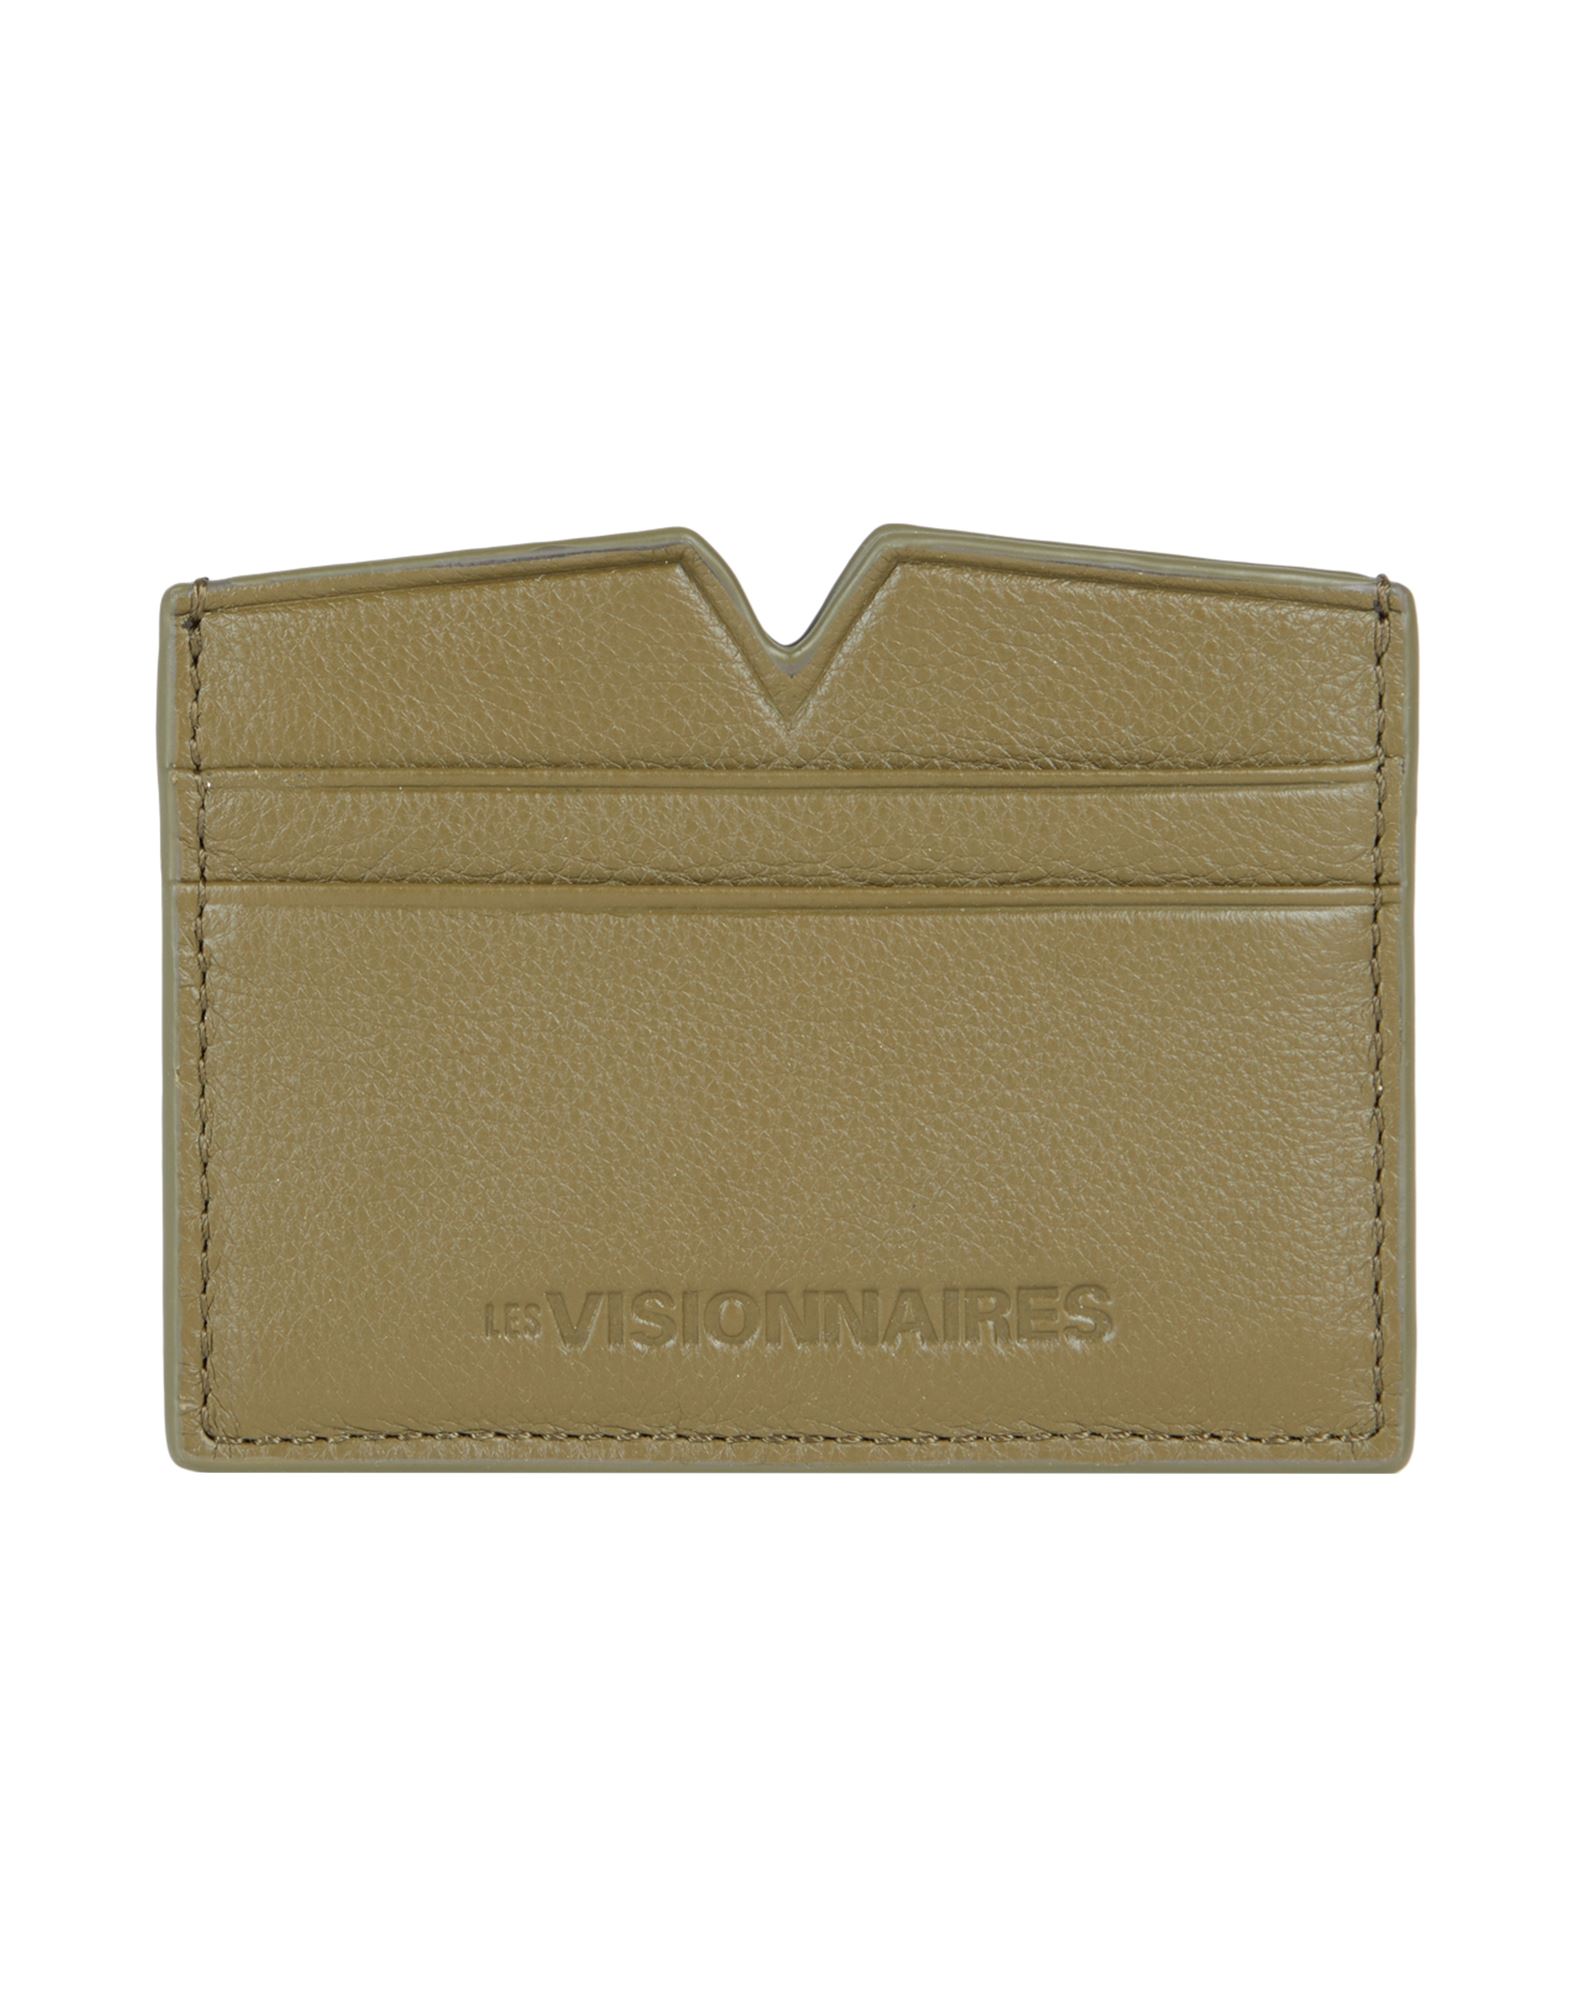 Les Visionnaires Document Holders In Green